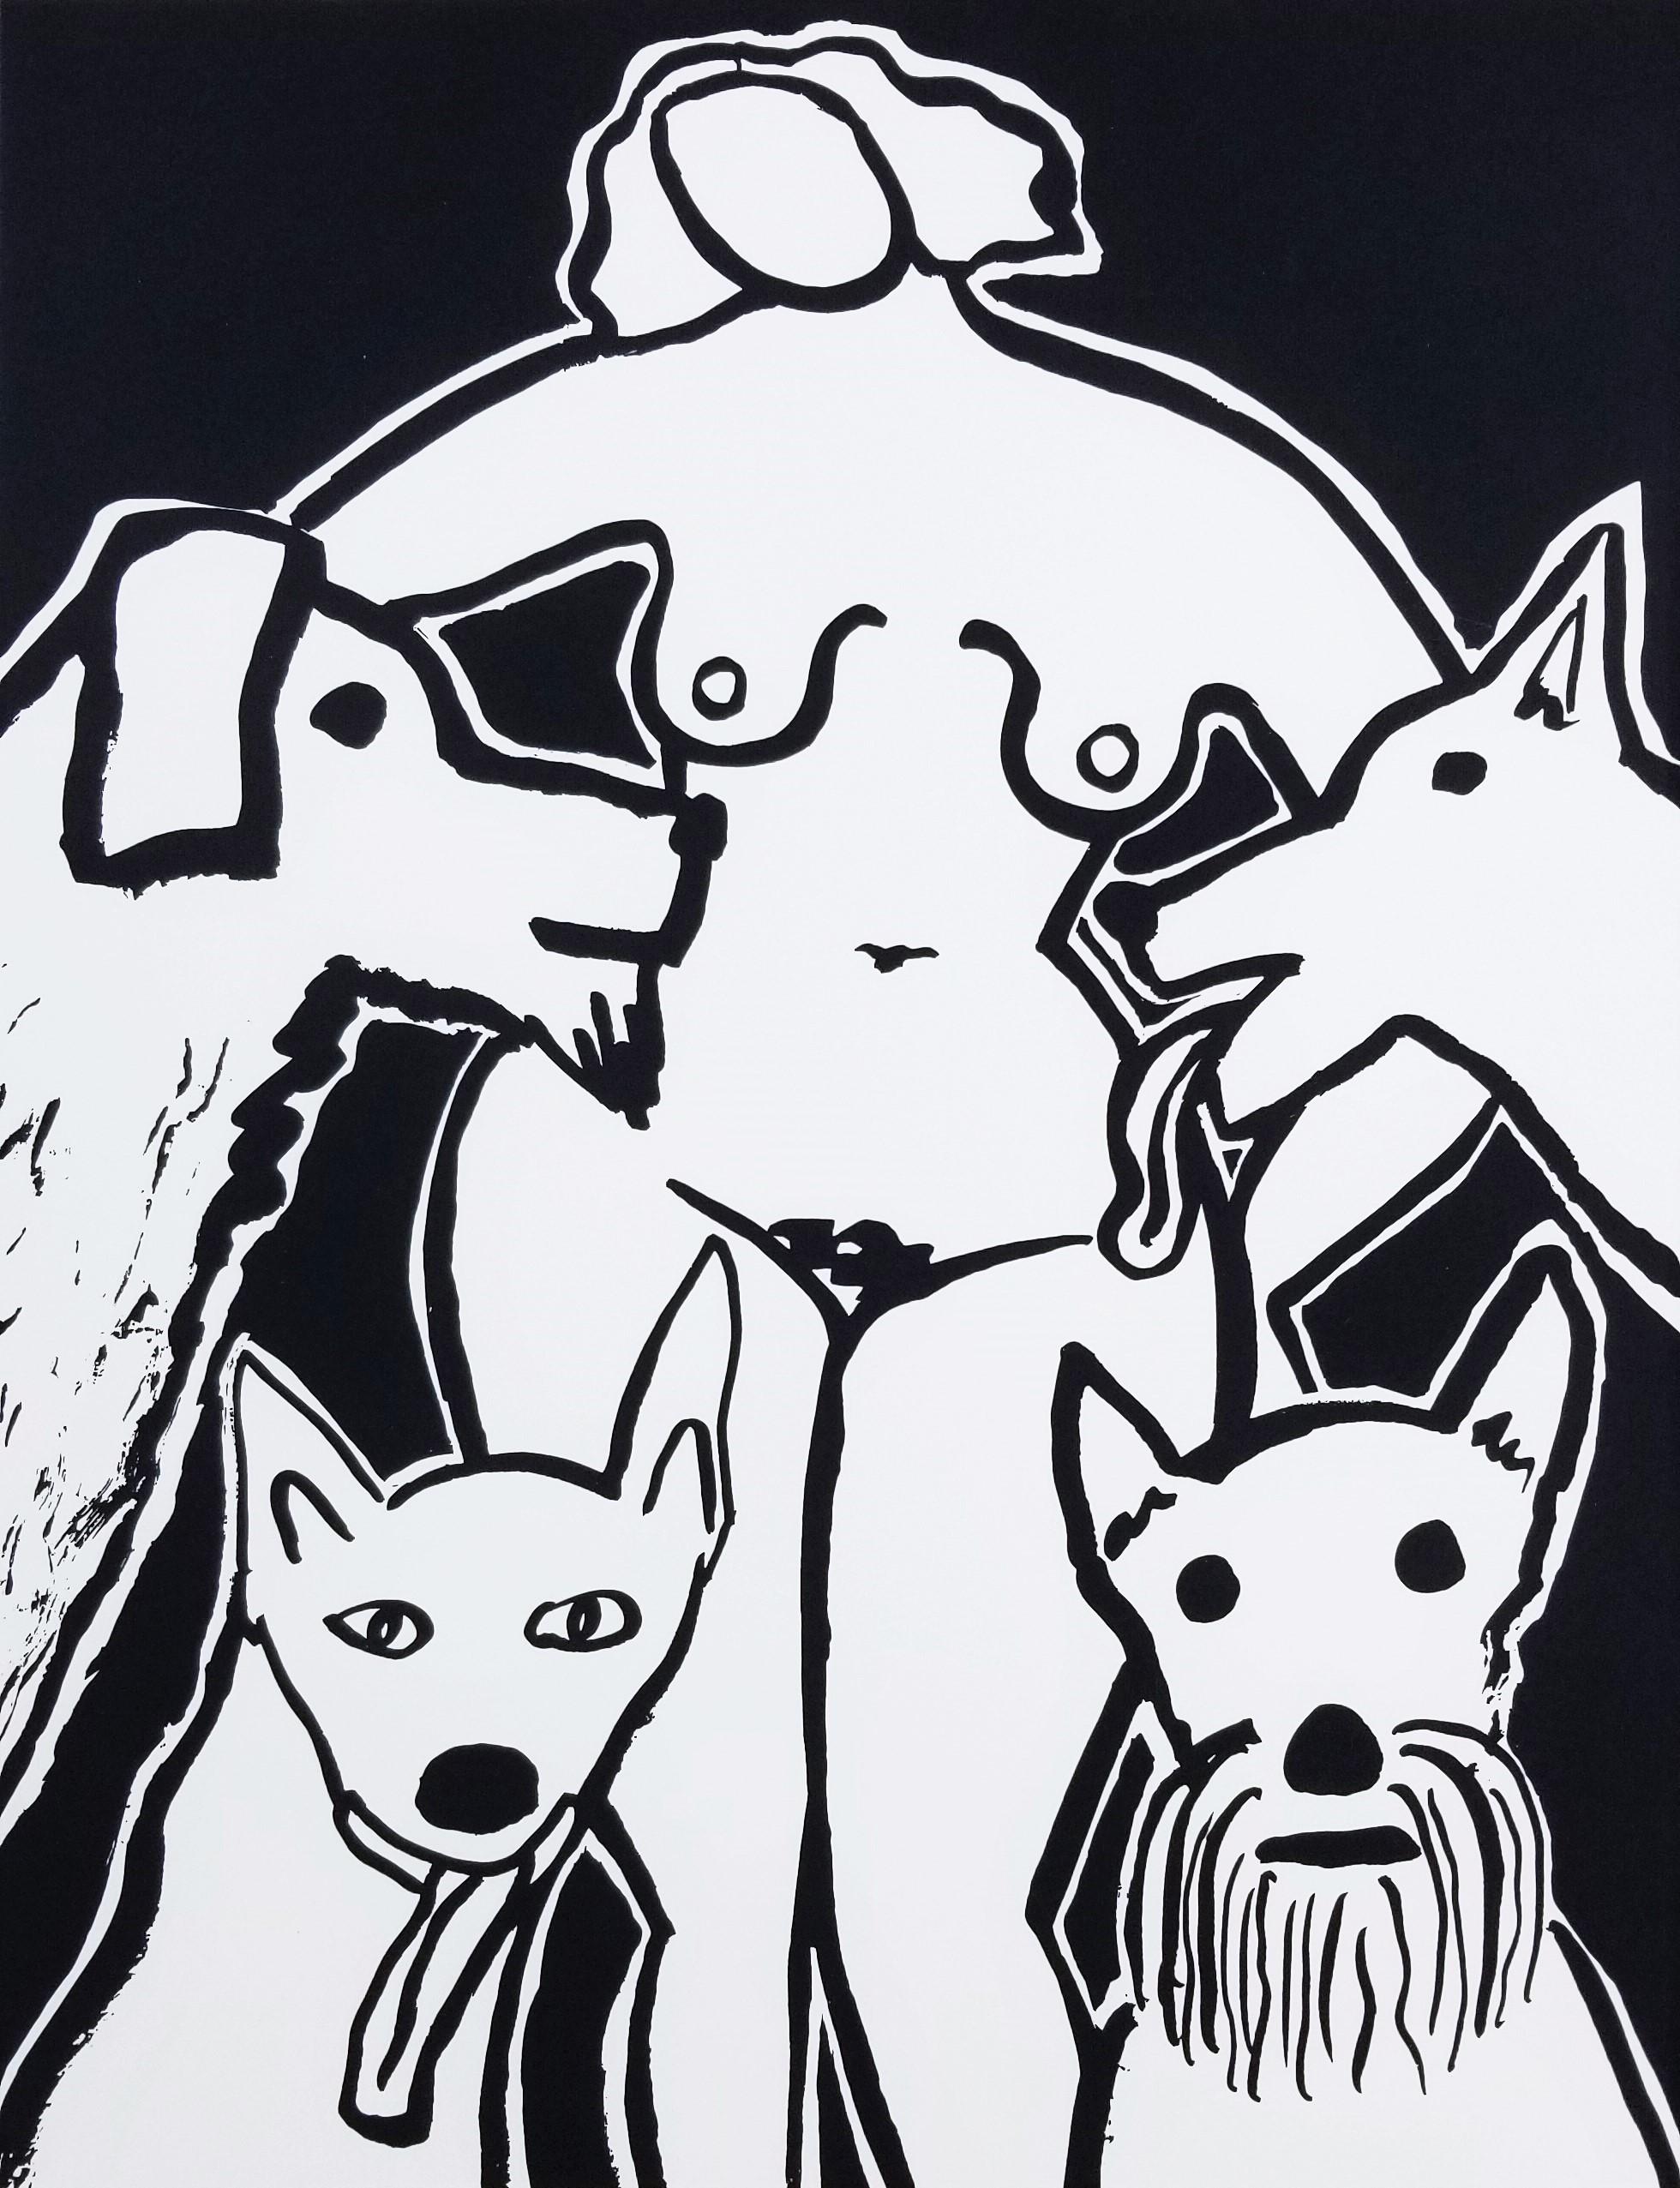 Dan May Nude Print - Nude with Dogs /// Contemporary Pop Art Screenprint Animal Pet Black and White